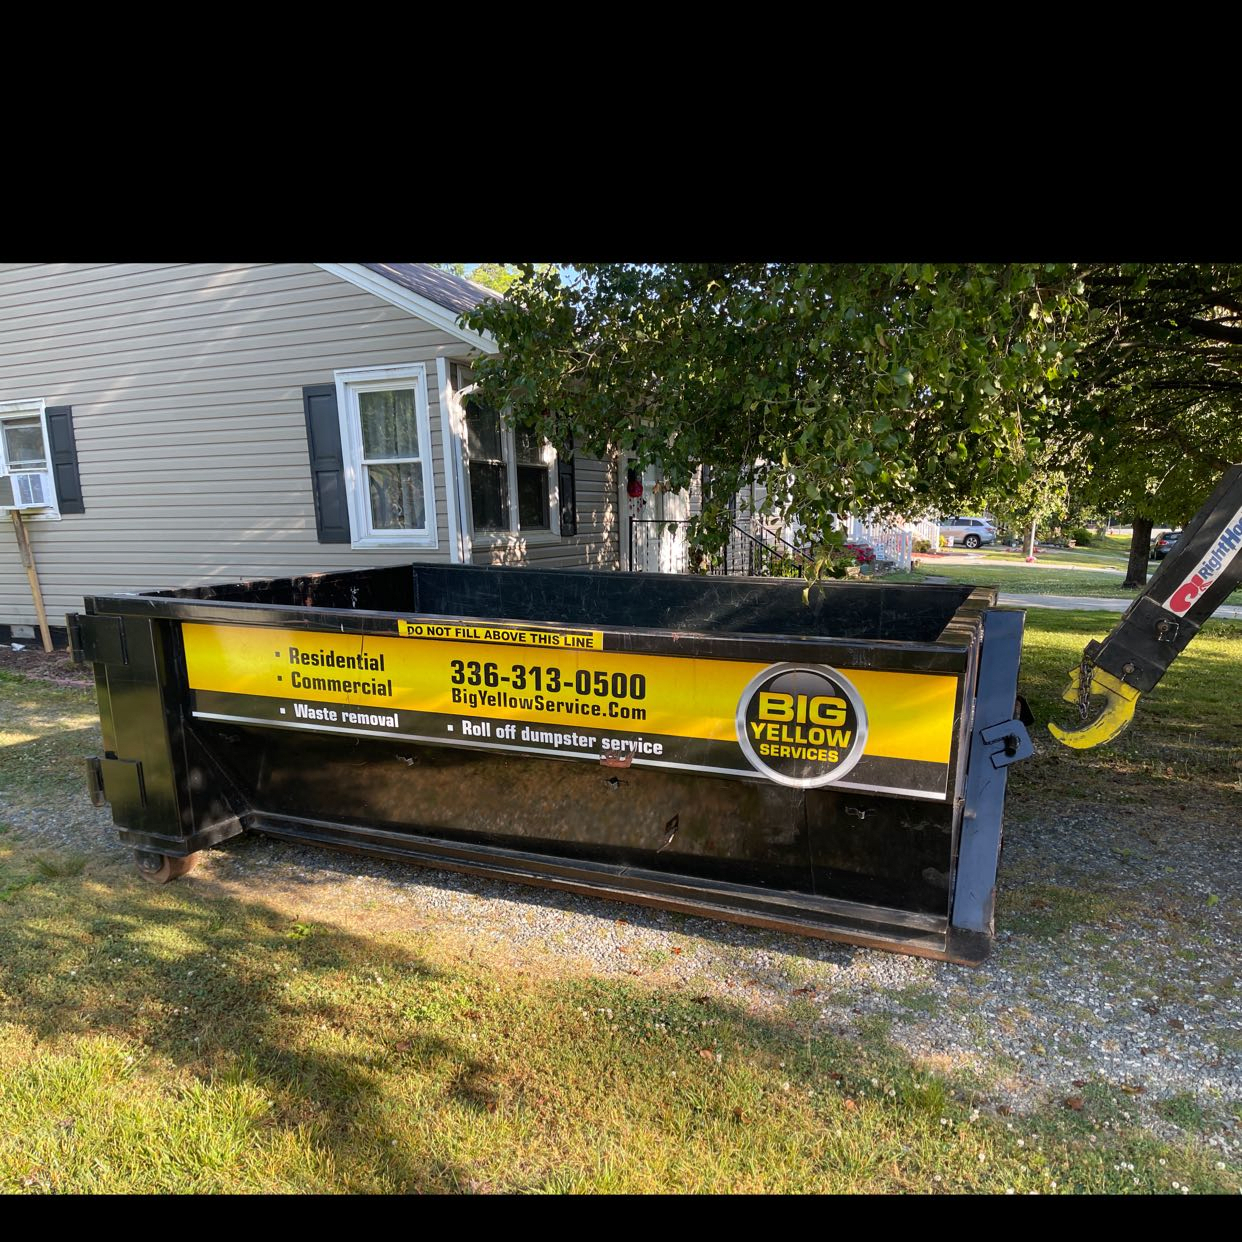 A-519 Piedmont Way Burlington, NC 27217 (2) Terms of Use | Roll-Off Dumpster Rentals | Big Yellow Services